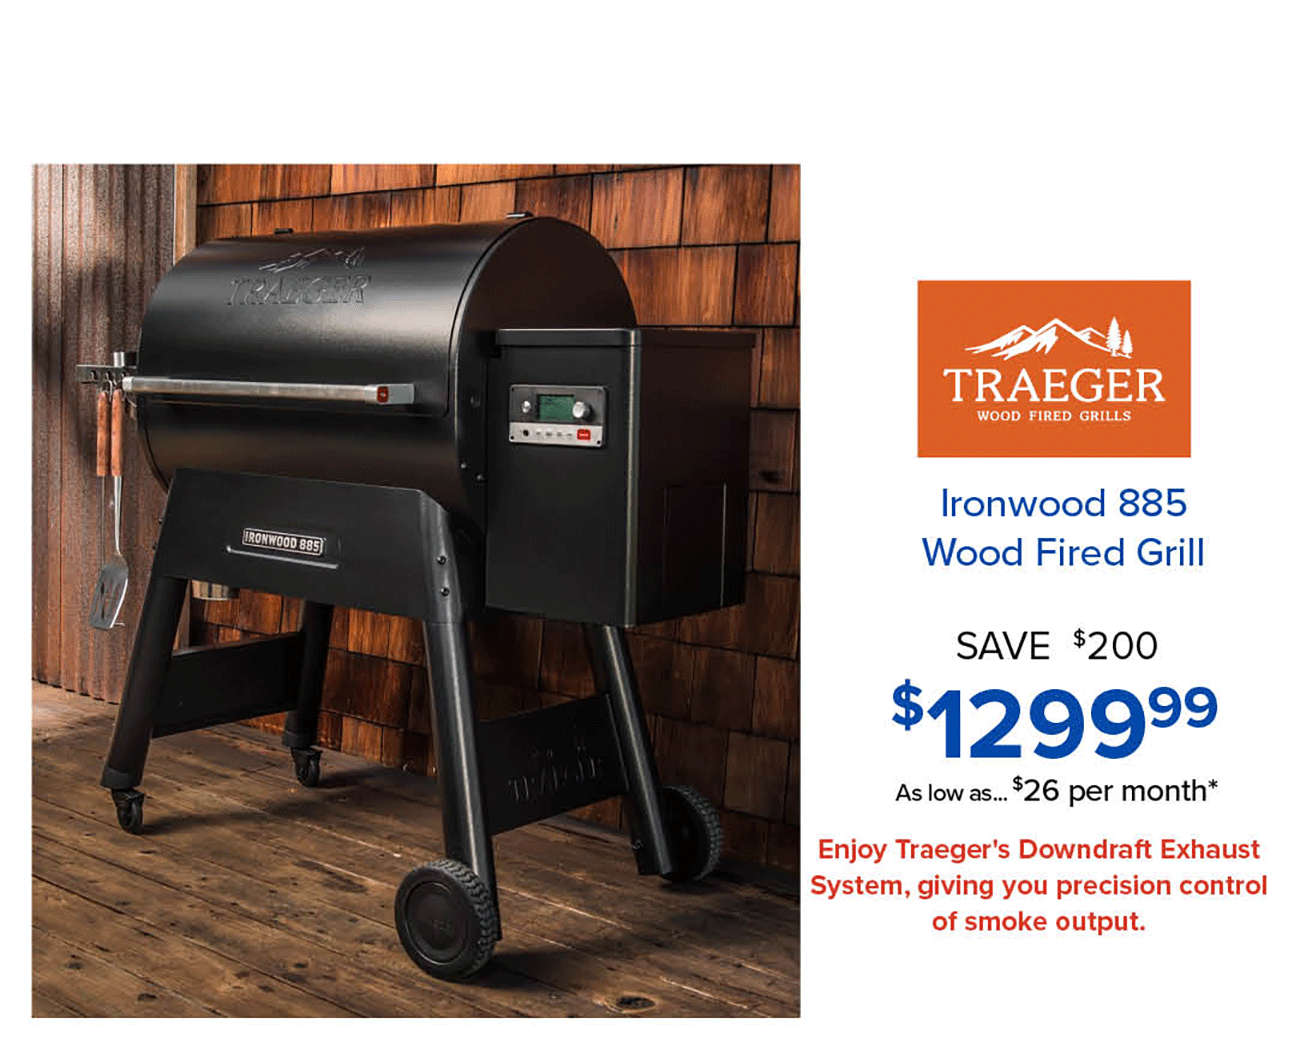 Traeger-Ironwood-885-Wood-Fired-Grill